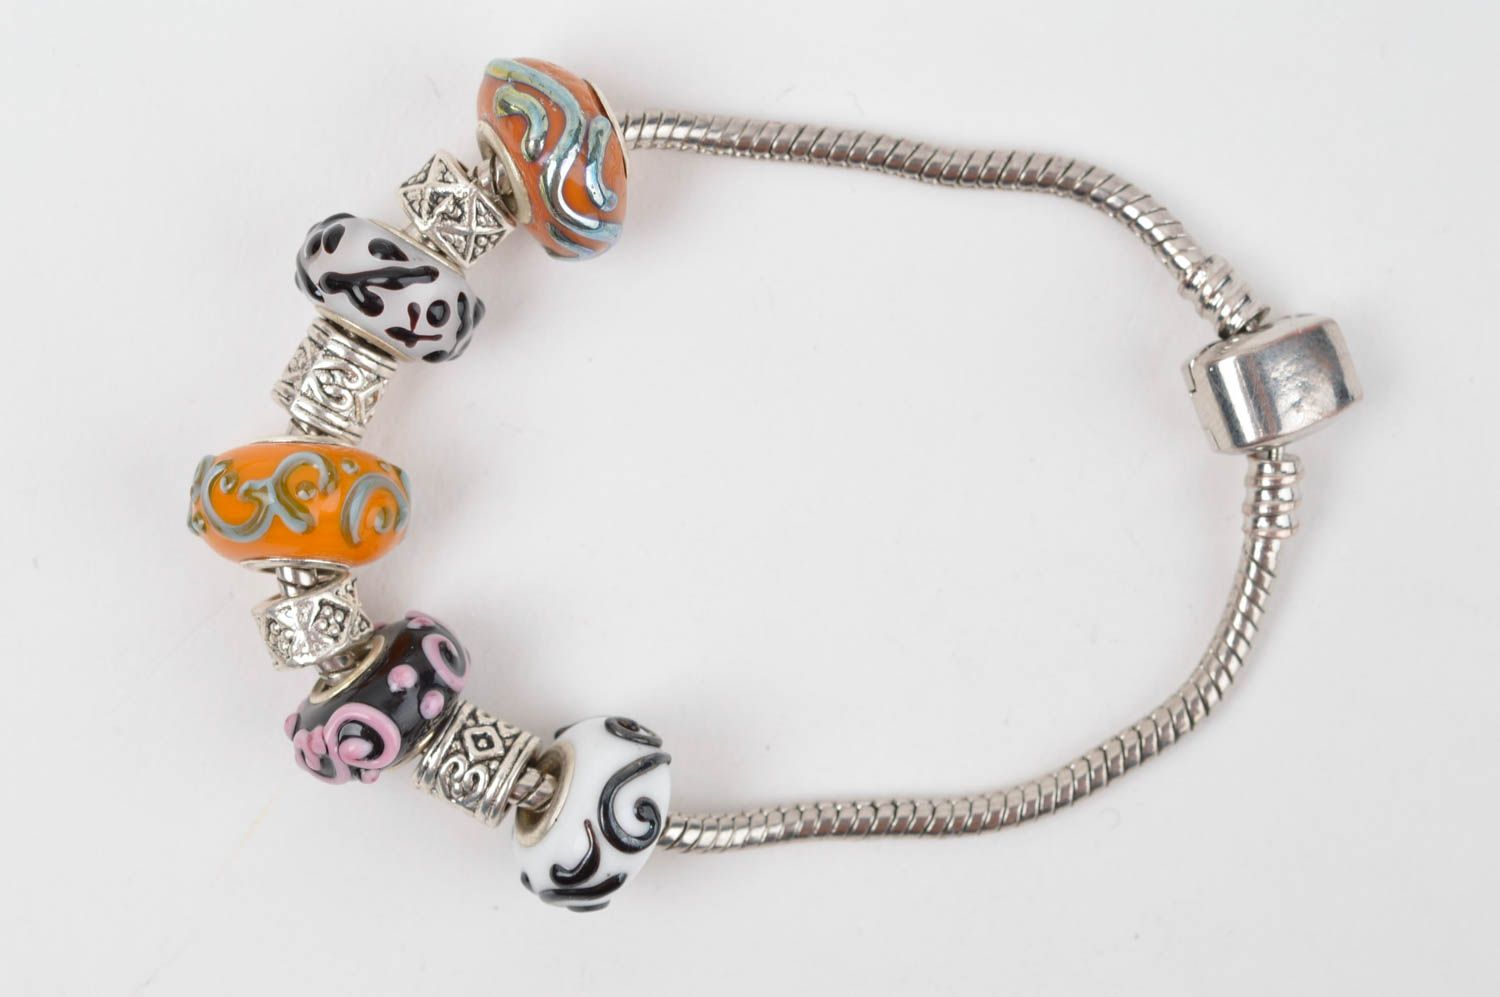 Pandora-style art glass wrist bracelet on the metal cord for a young girl photo 2